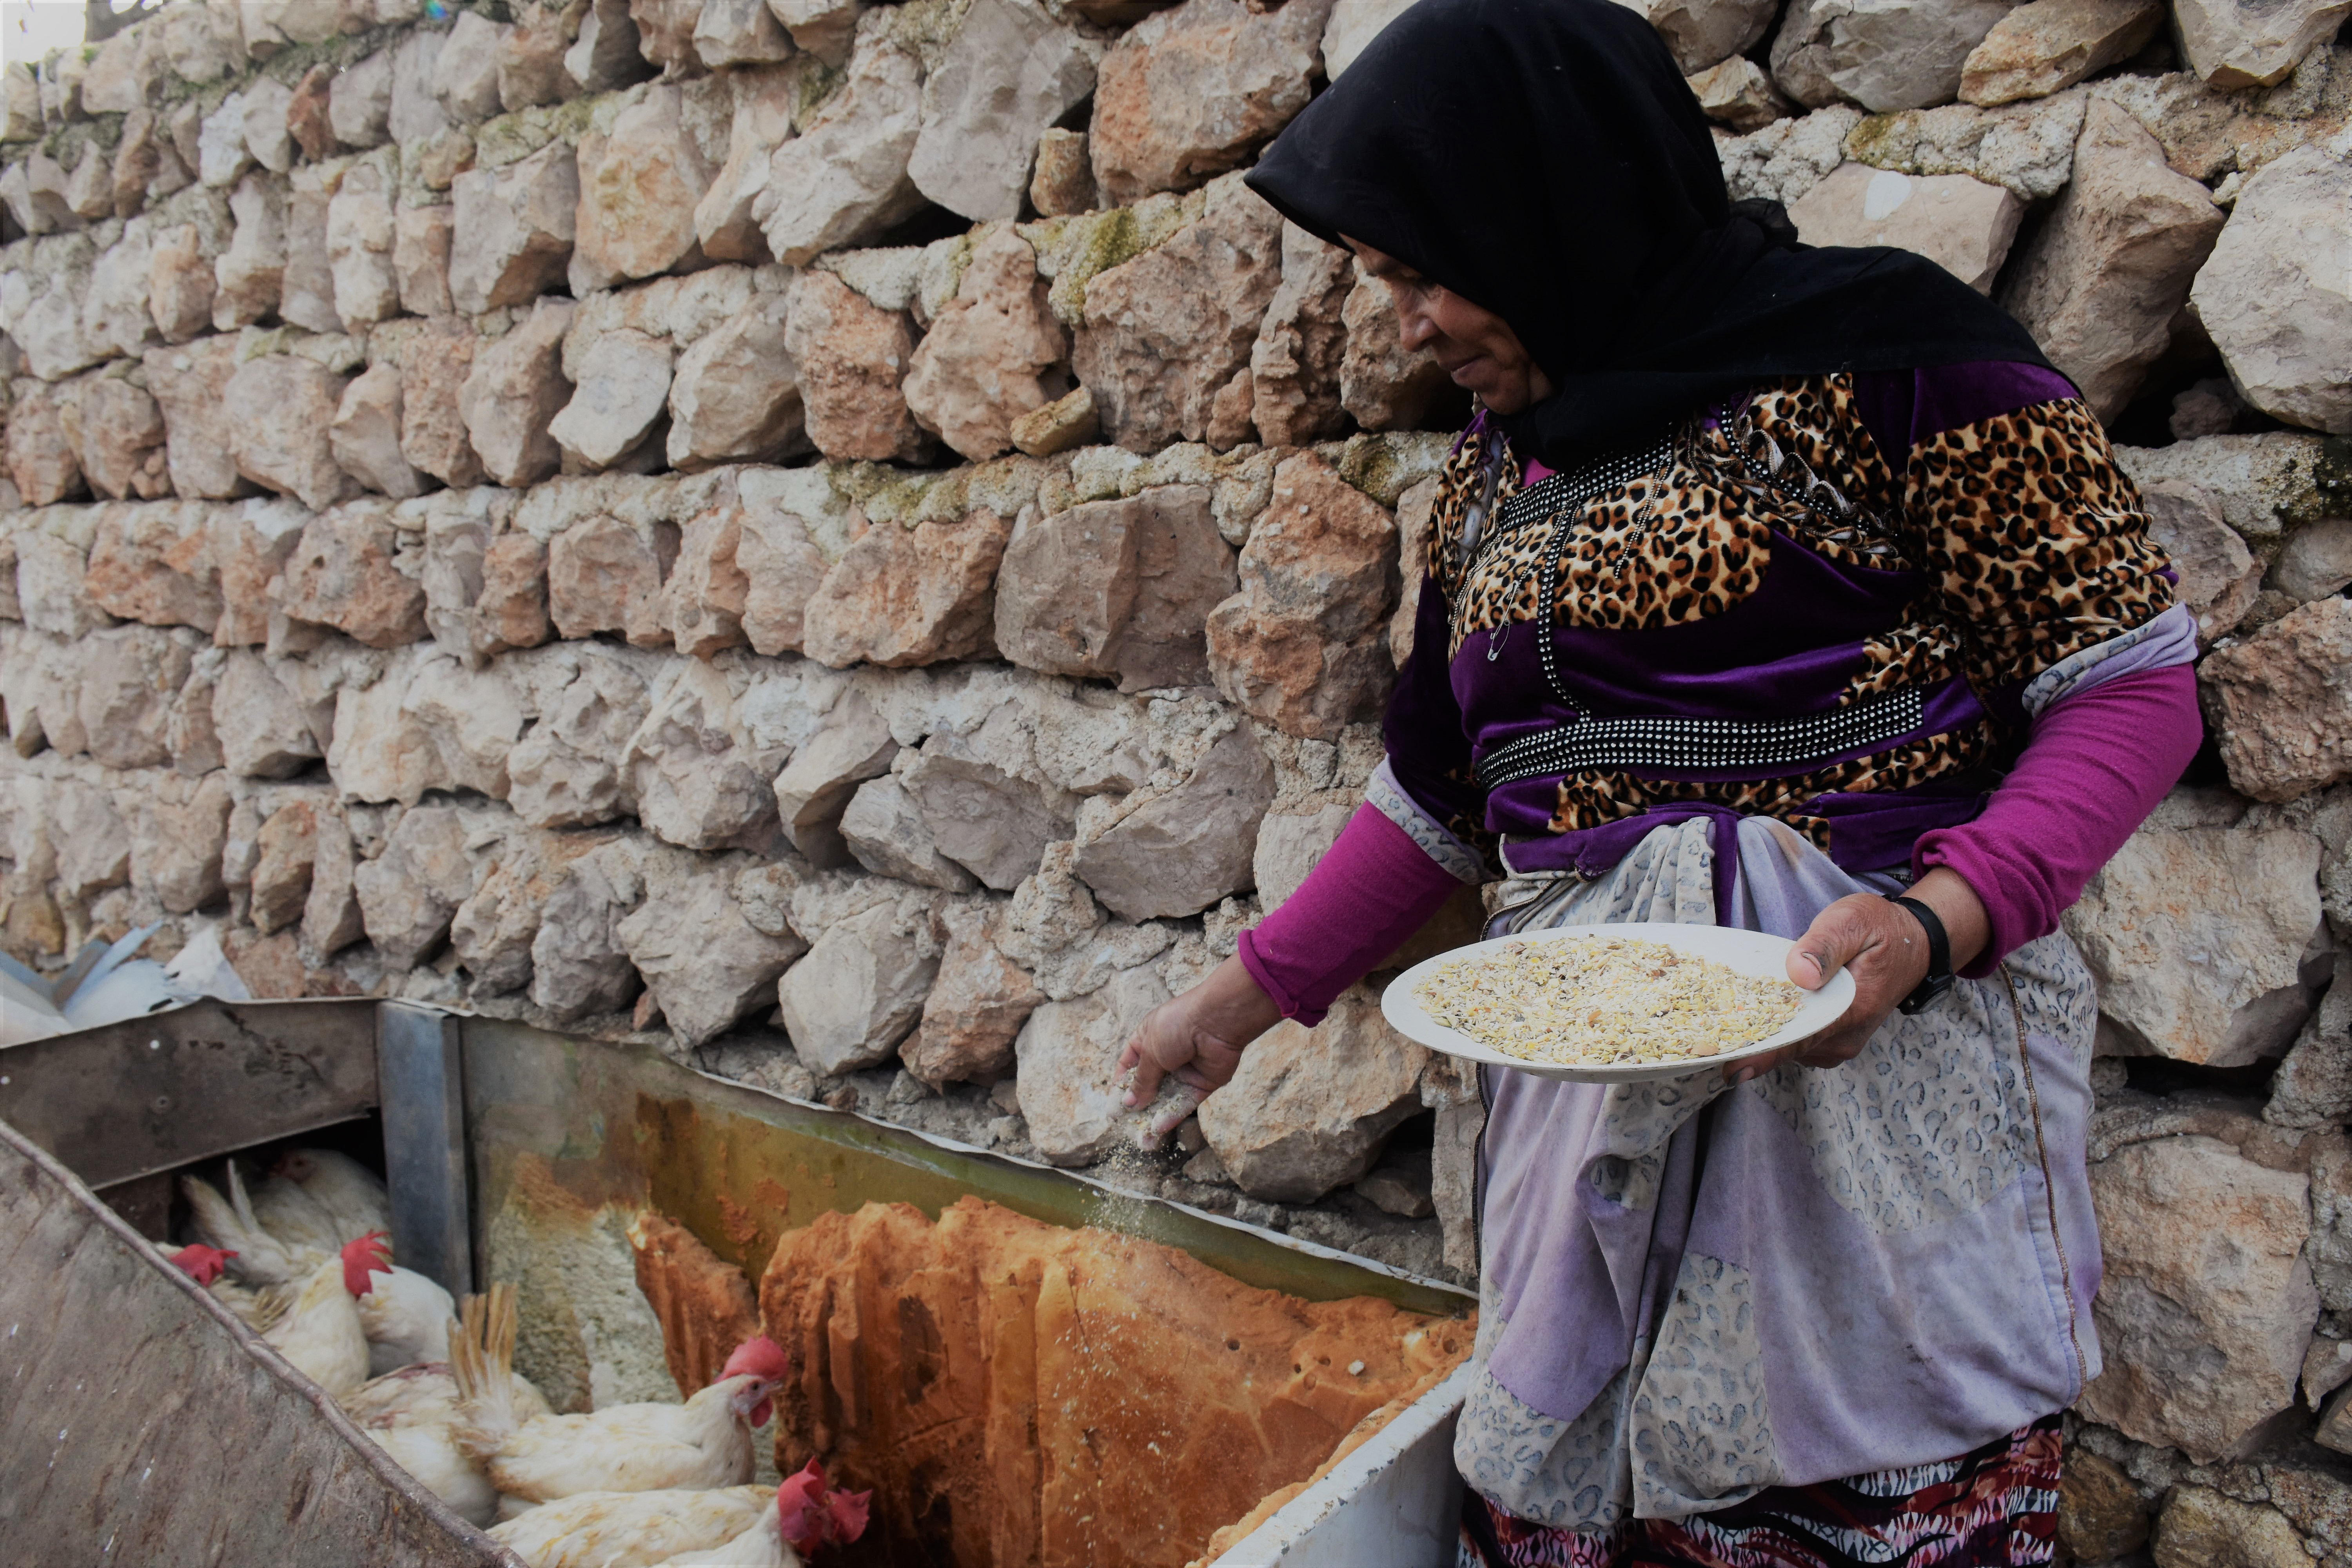 Nouf, 44, fled her home in rural Aleppo’s Huajjeneh. Although the mother of seven has recently returned with her family, she faces many challenges ahead. Oxfam has provided 250 vulnerable families in rural Aleppo with chickens and chicken feed to help them make a living. The eggs produced provide a source of both food and income. (Photo: Dania Kareh / Oxfam)